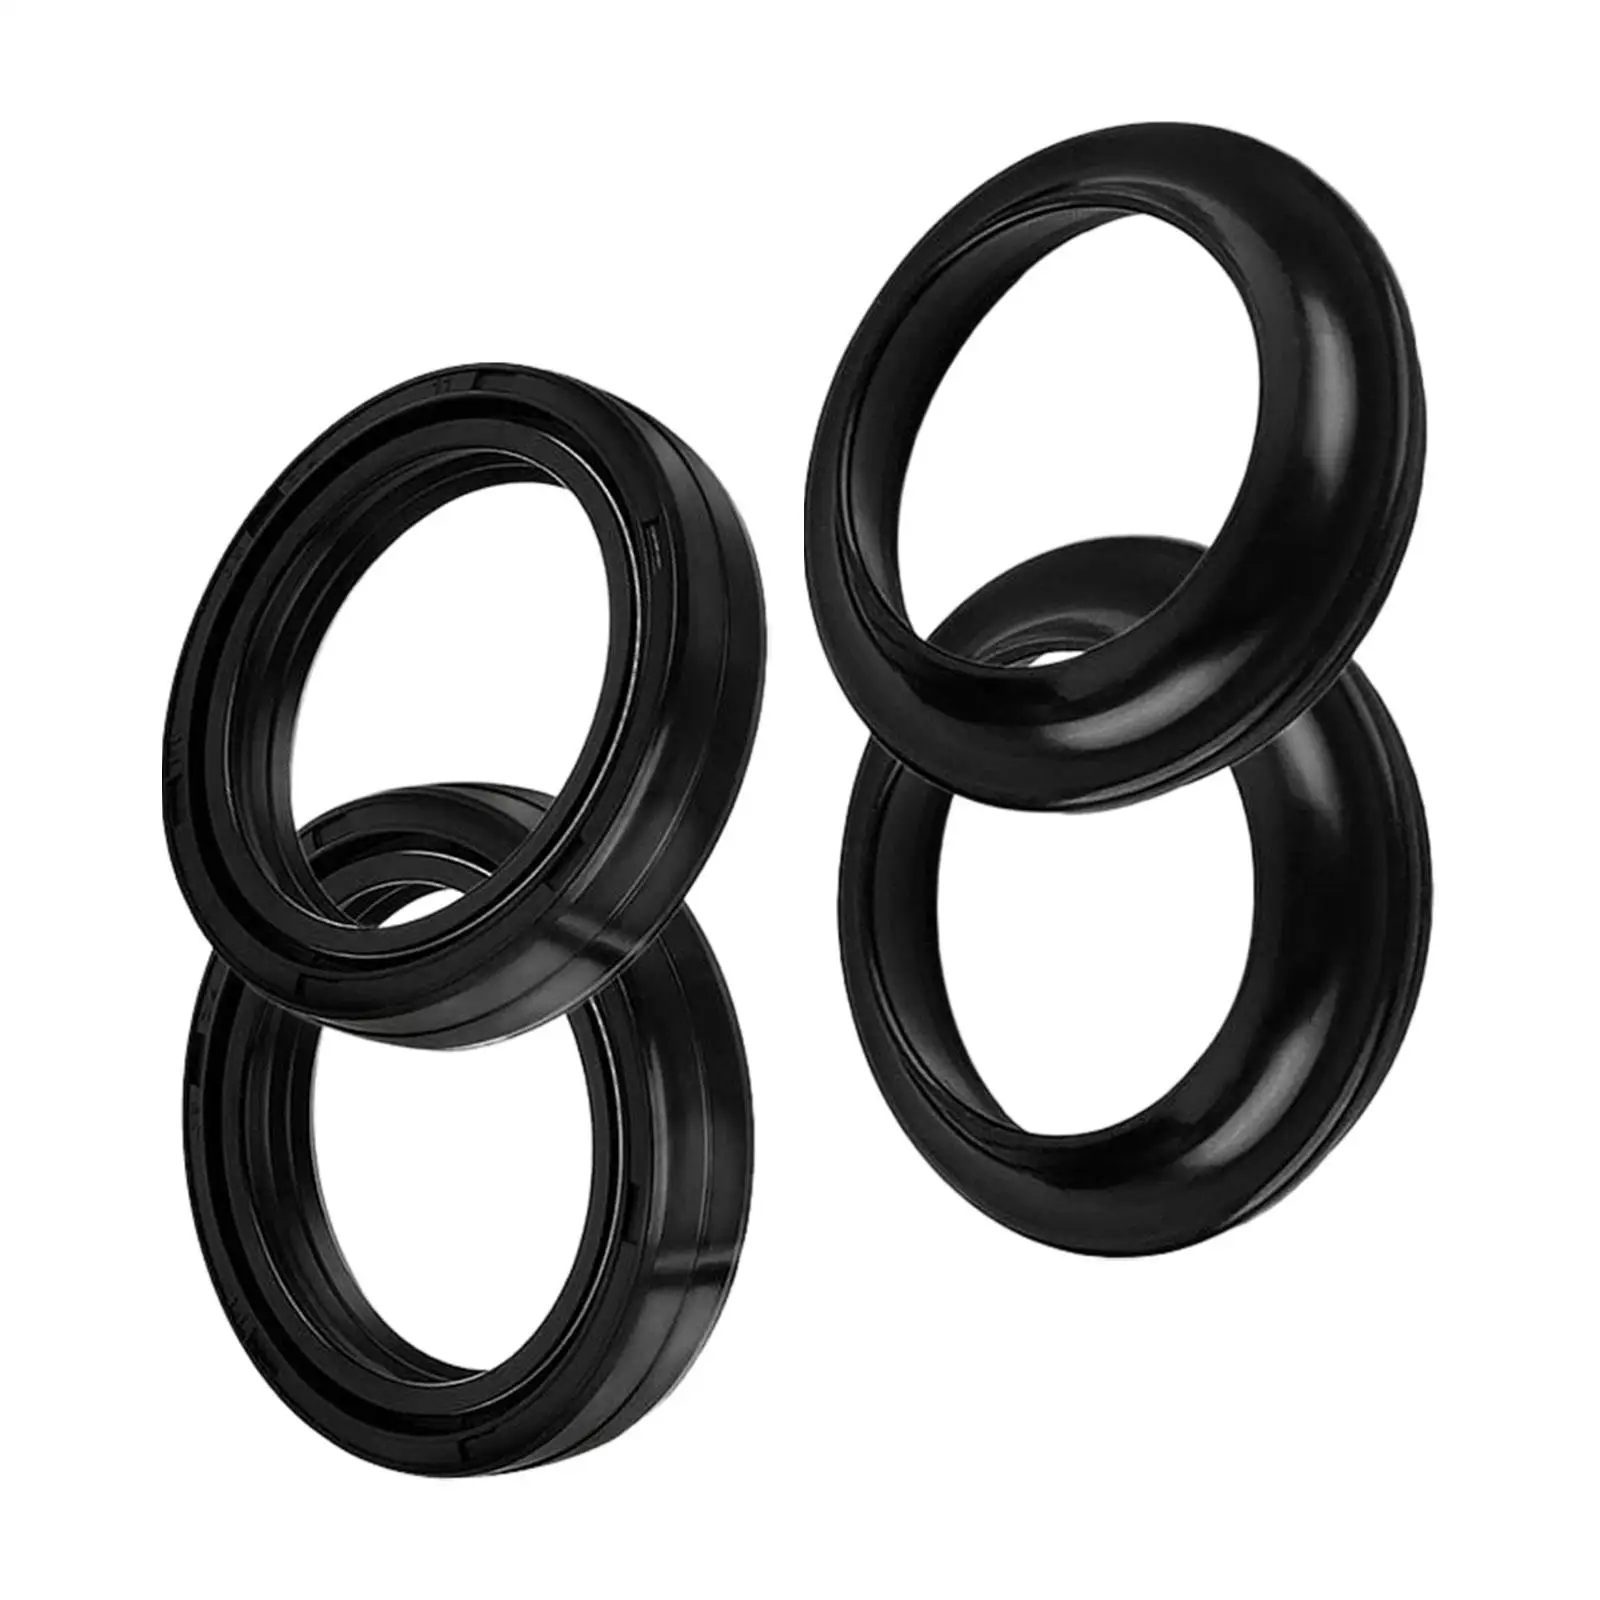 4Pcs Front Fork Oil Seal and Dust Seal, 39x52x11mm ,Wear Resistance for XL883N